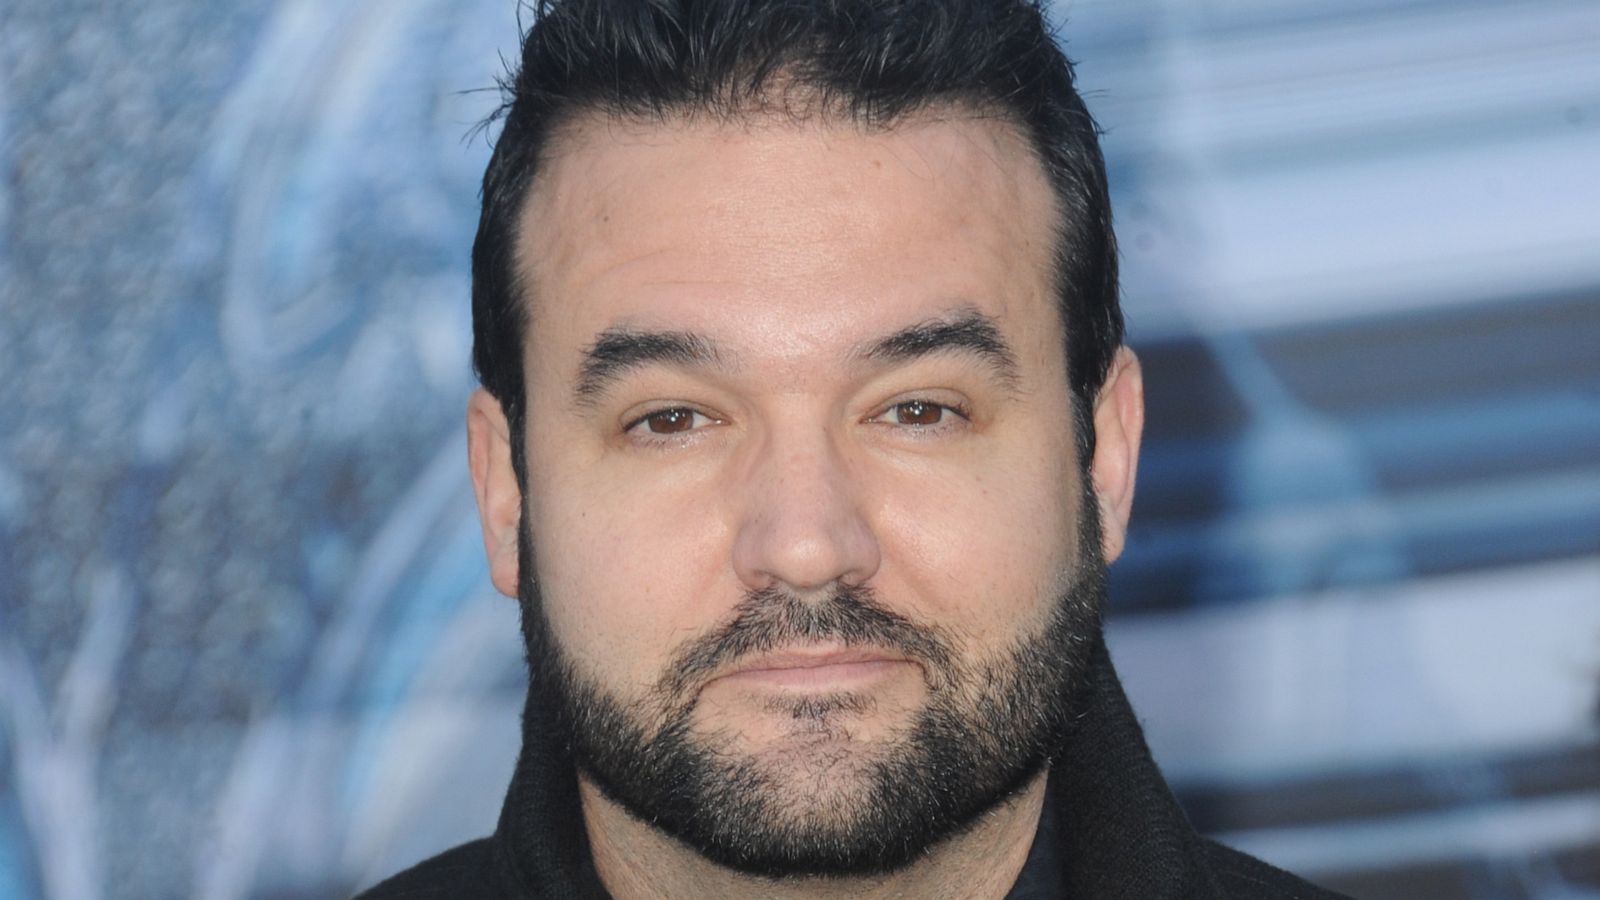 ‘Power Rangers’ actor Austin St. John charged with COVID-19 fraud